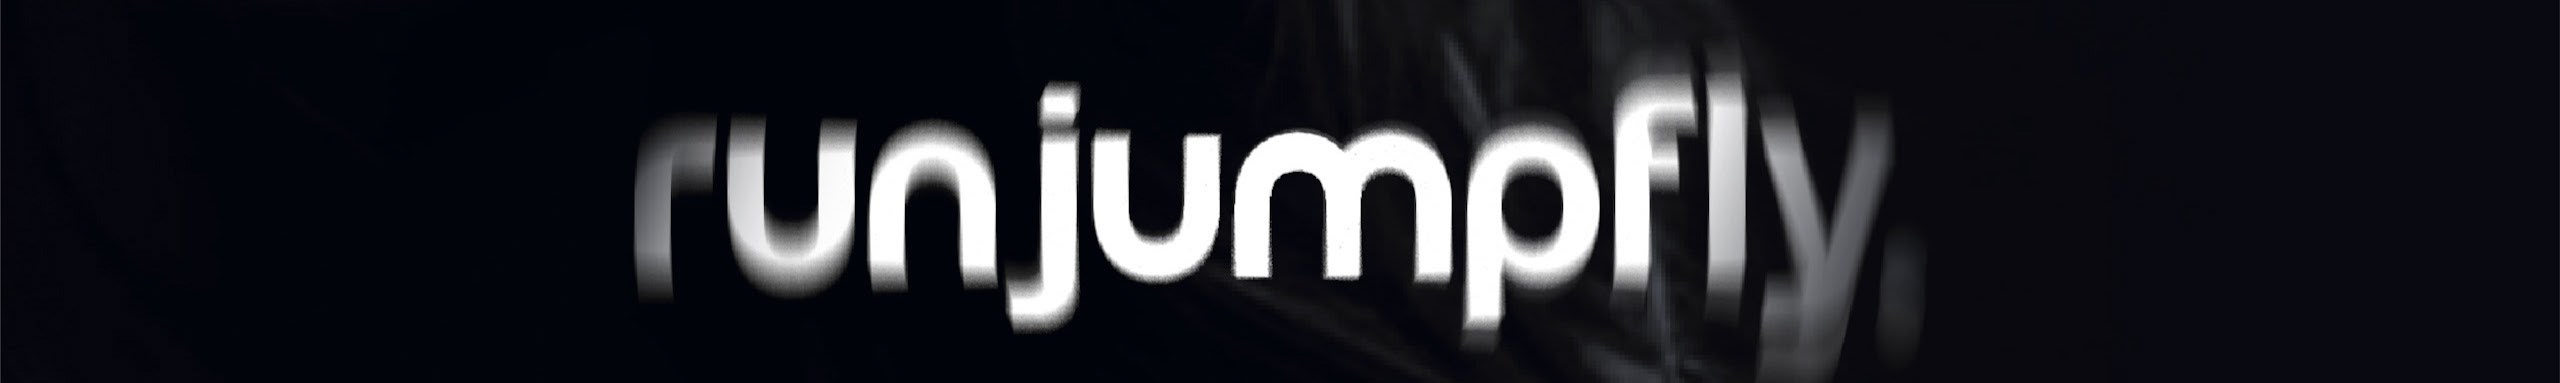 Run Jump Fly Digital Content Agency's profile banner